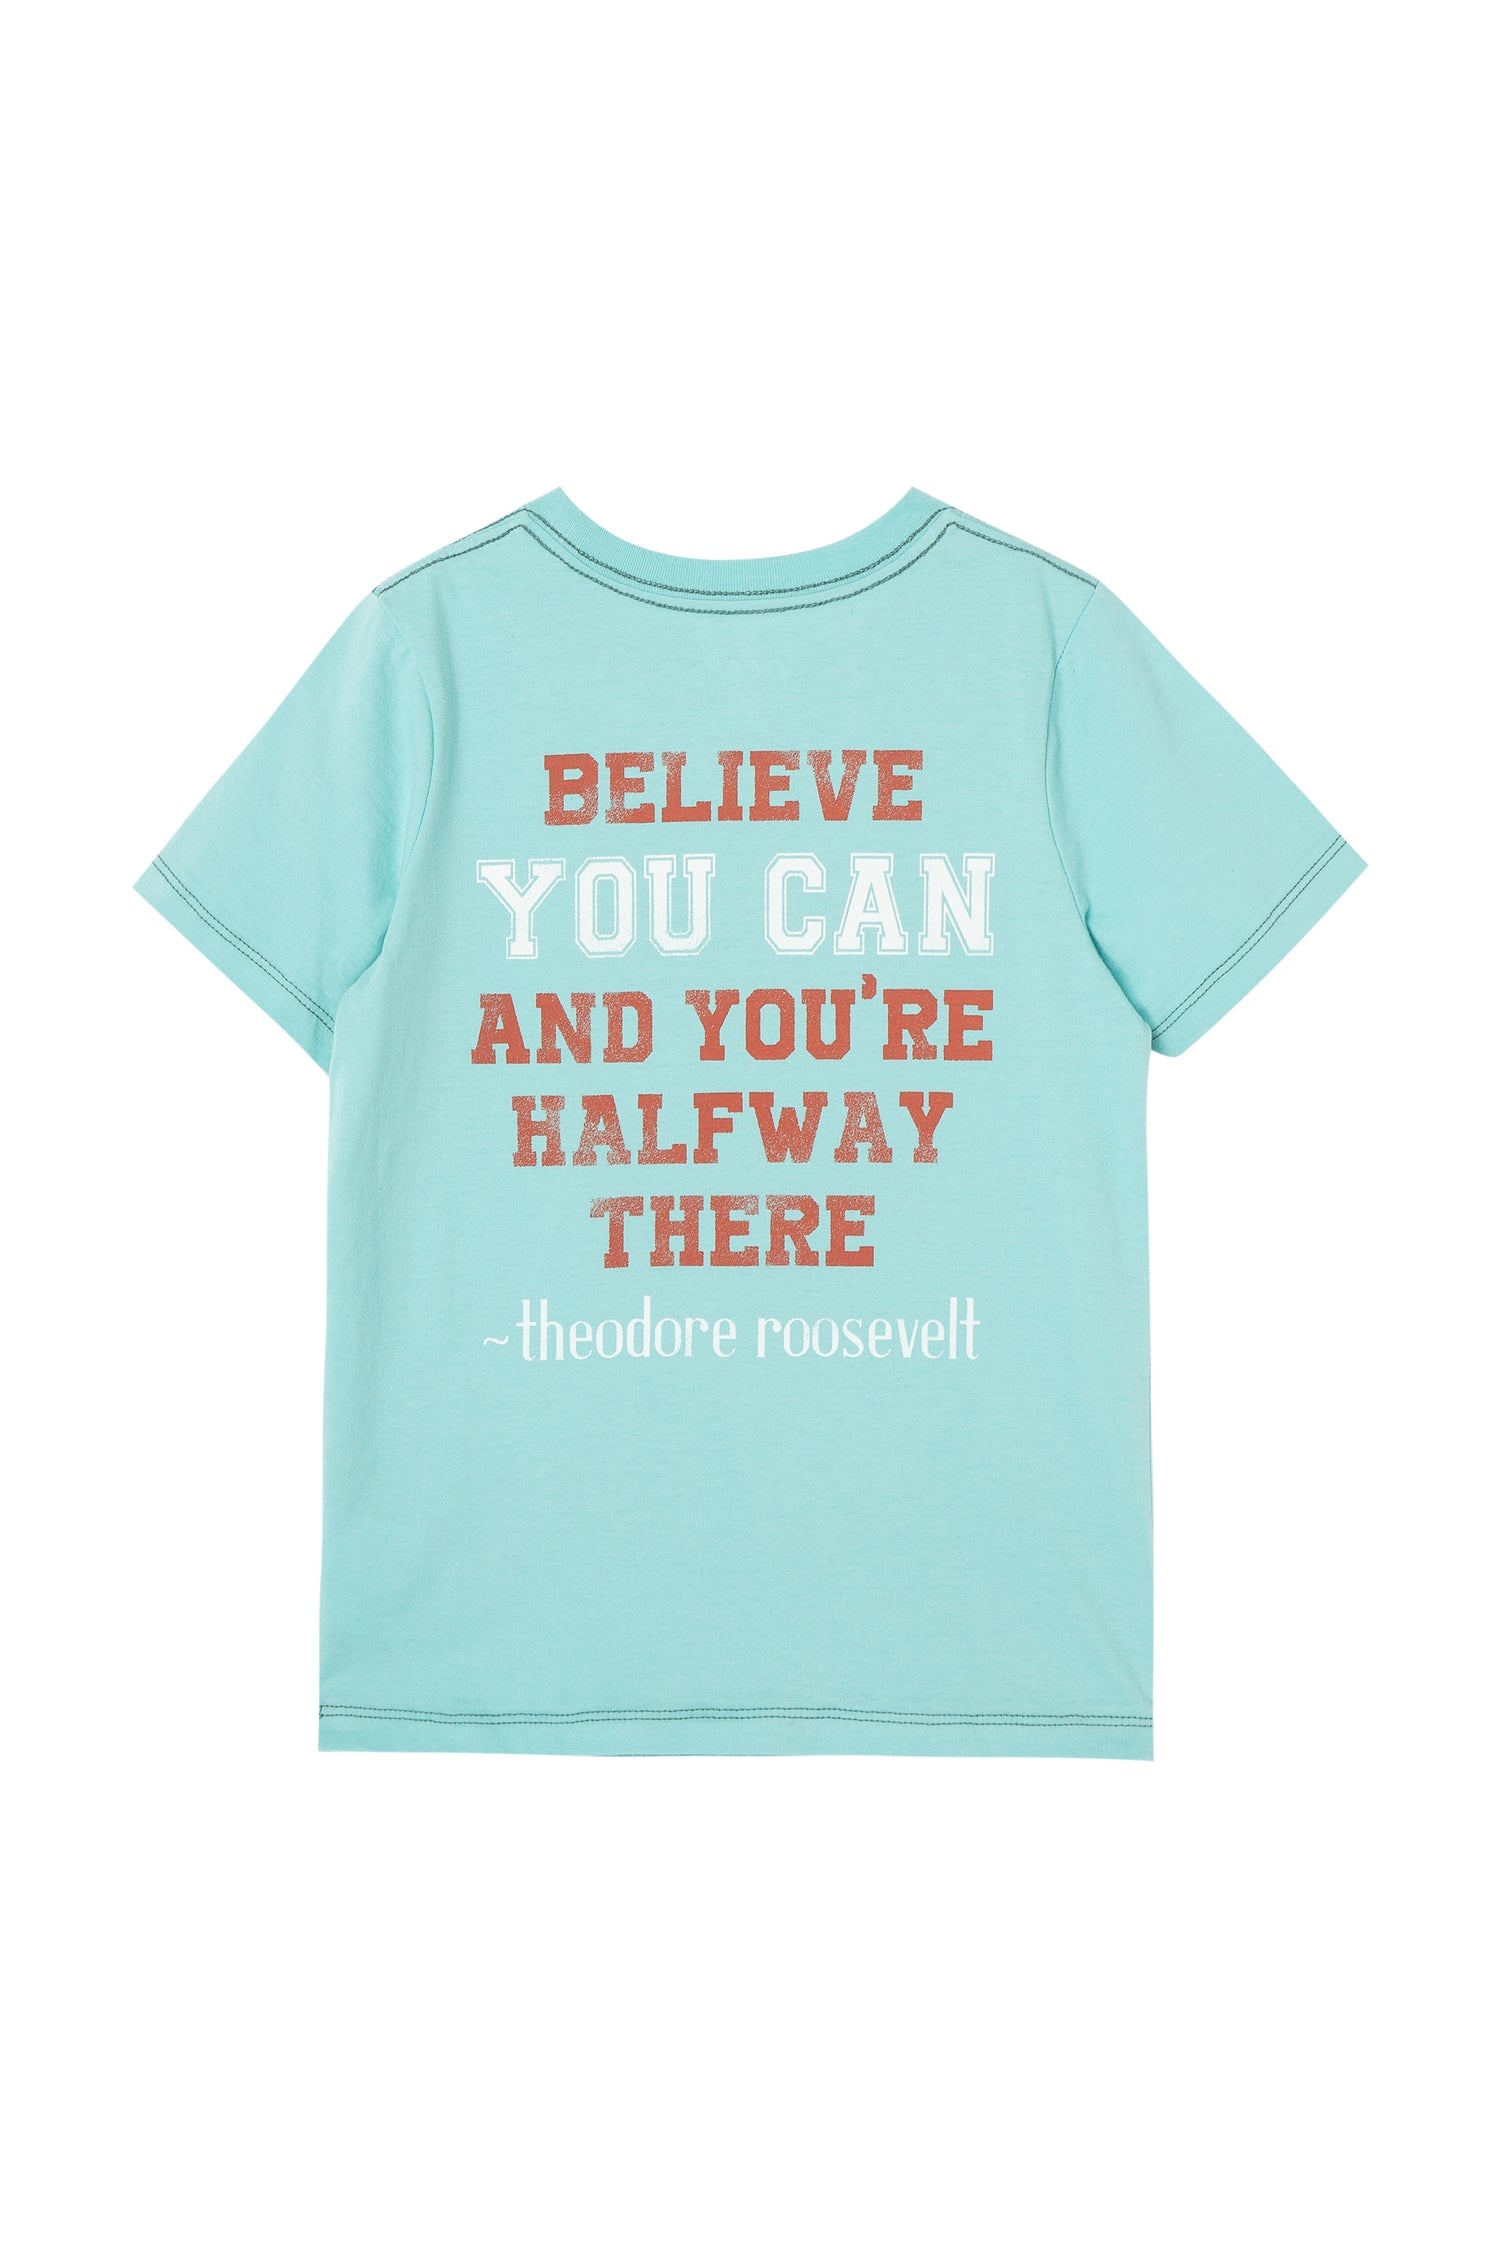 Back view of blue tee with "believe you can and you're halfway there" written